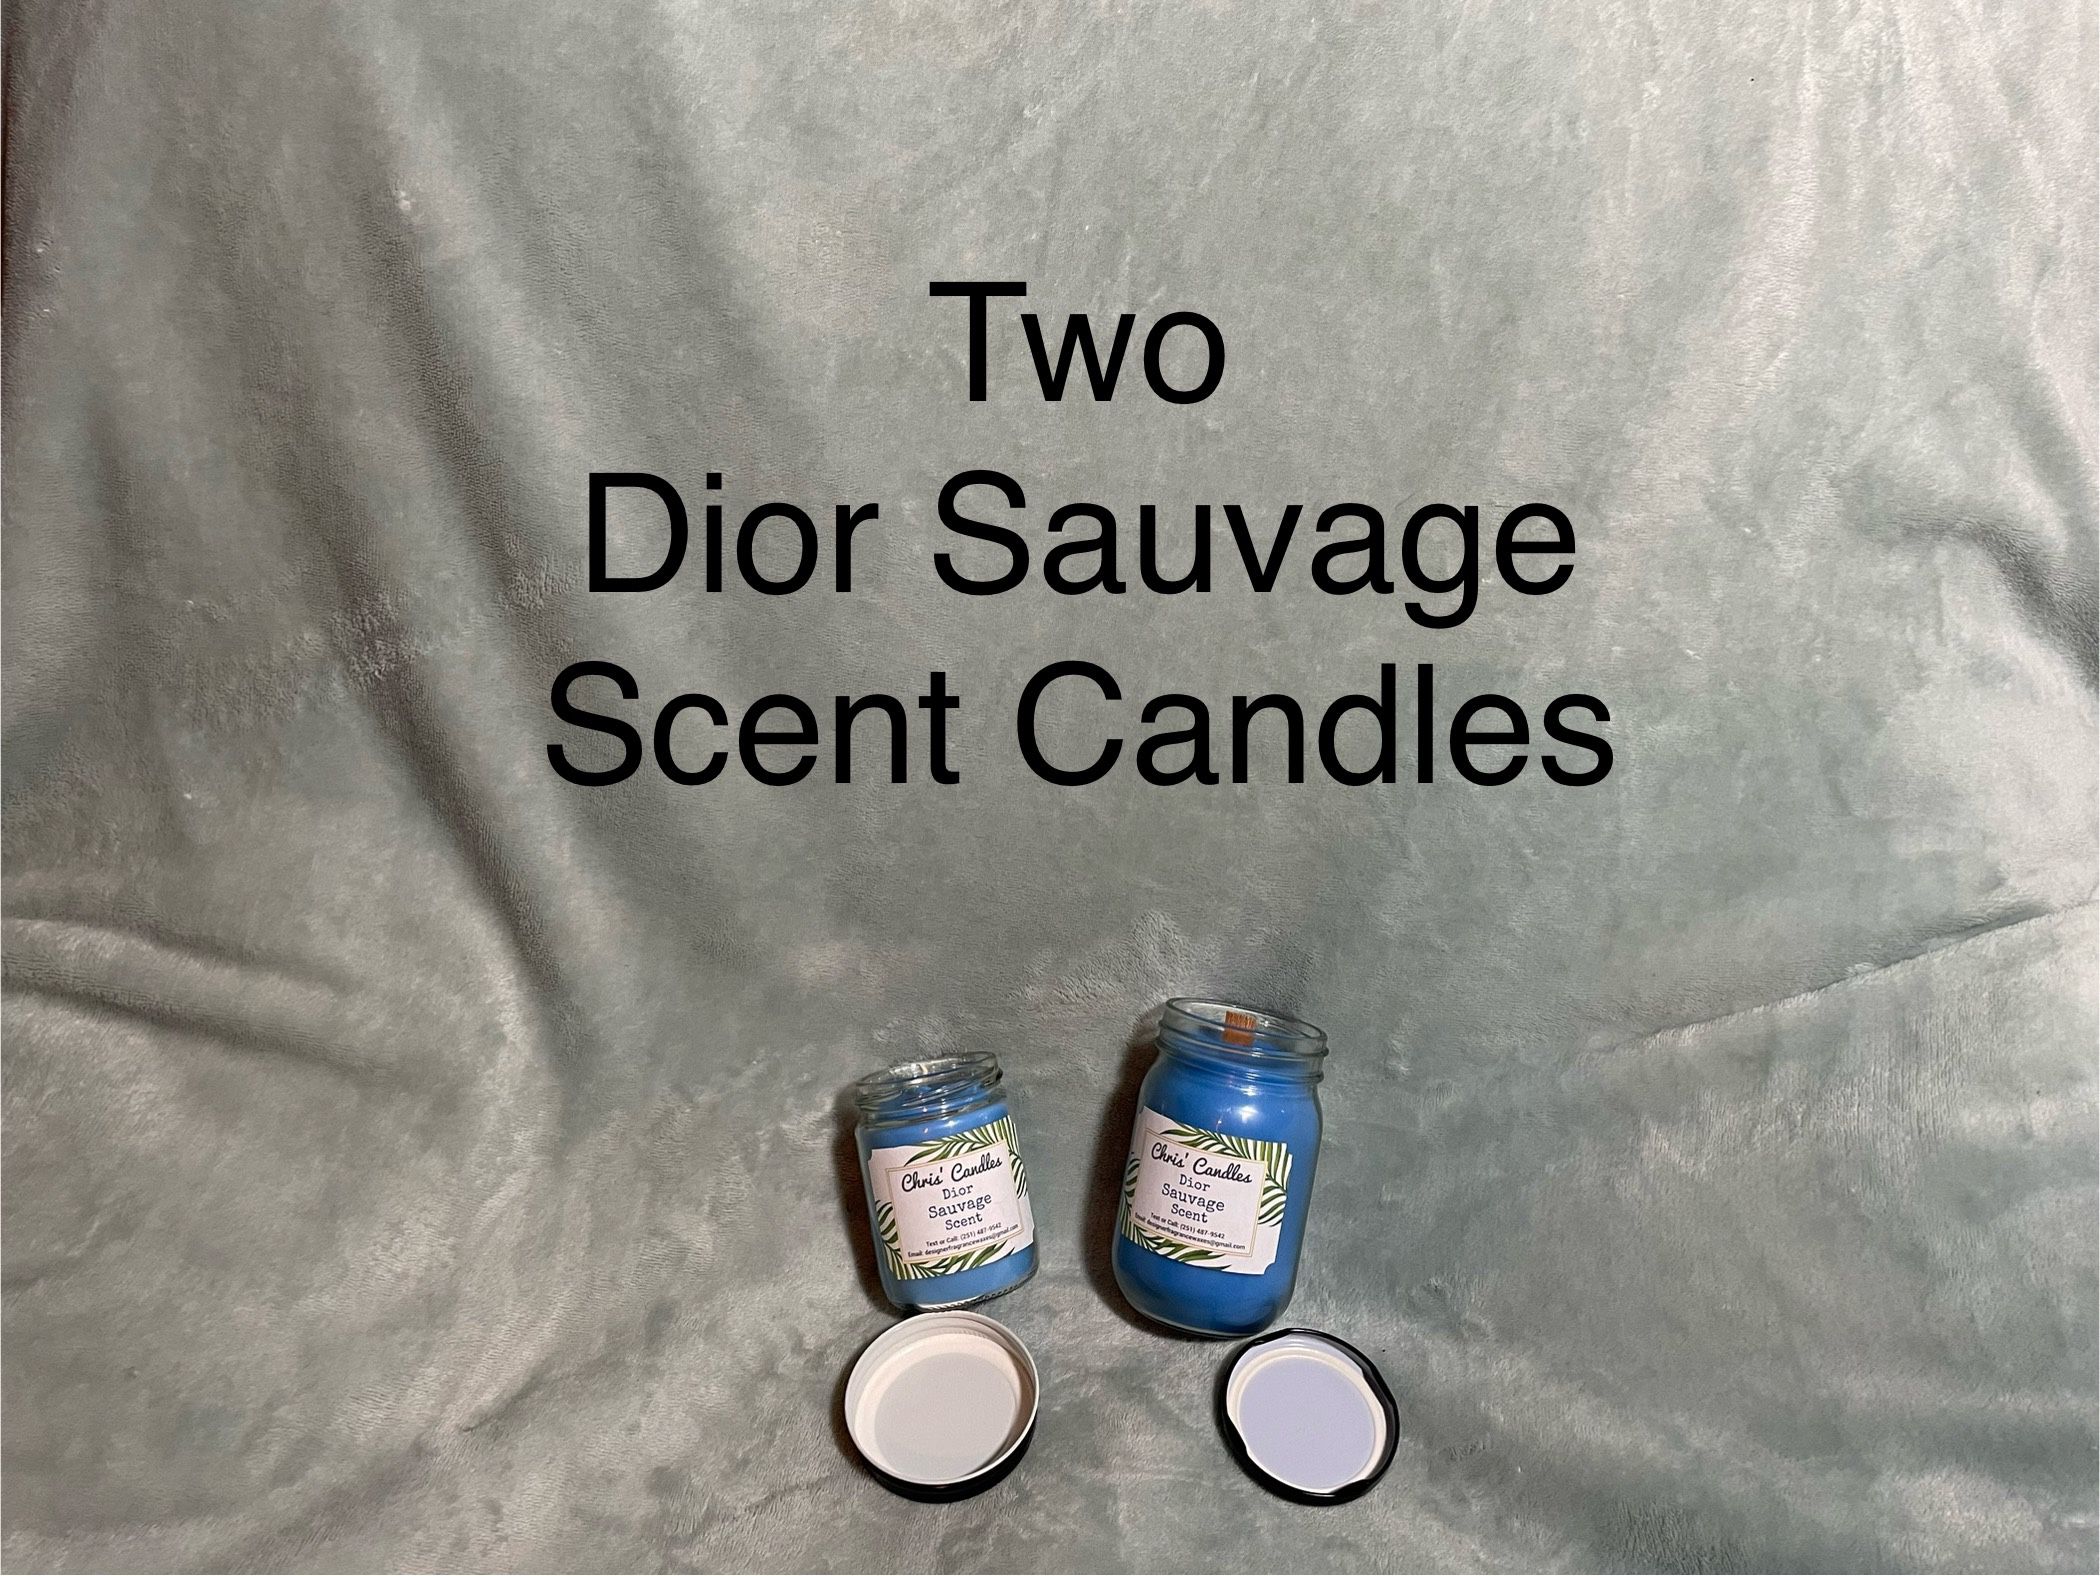 Two Dior Sauvage Scent Candles